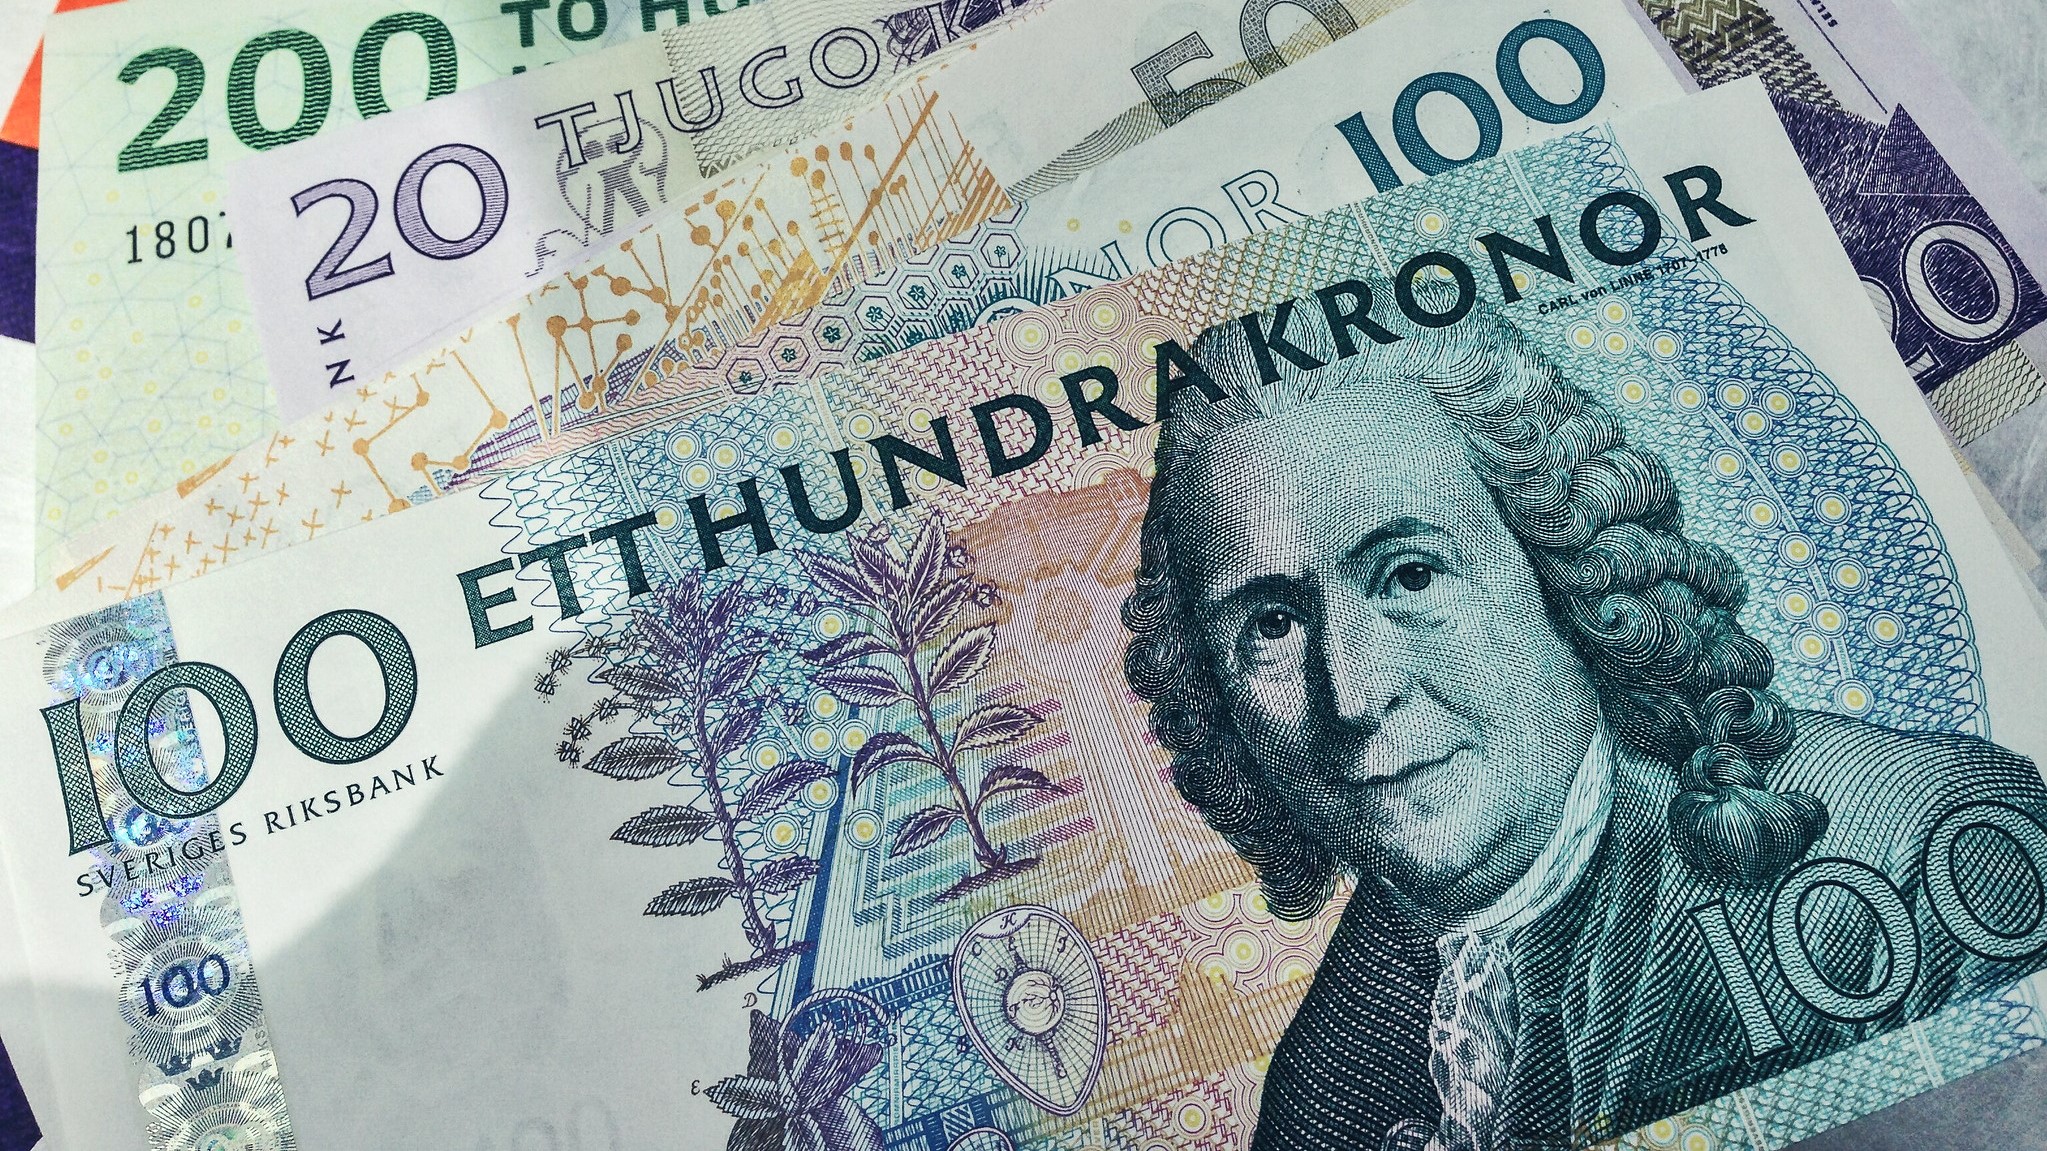 Swedish paper currency